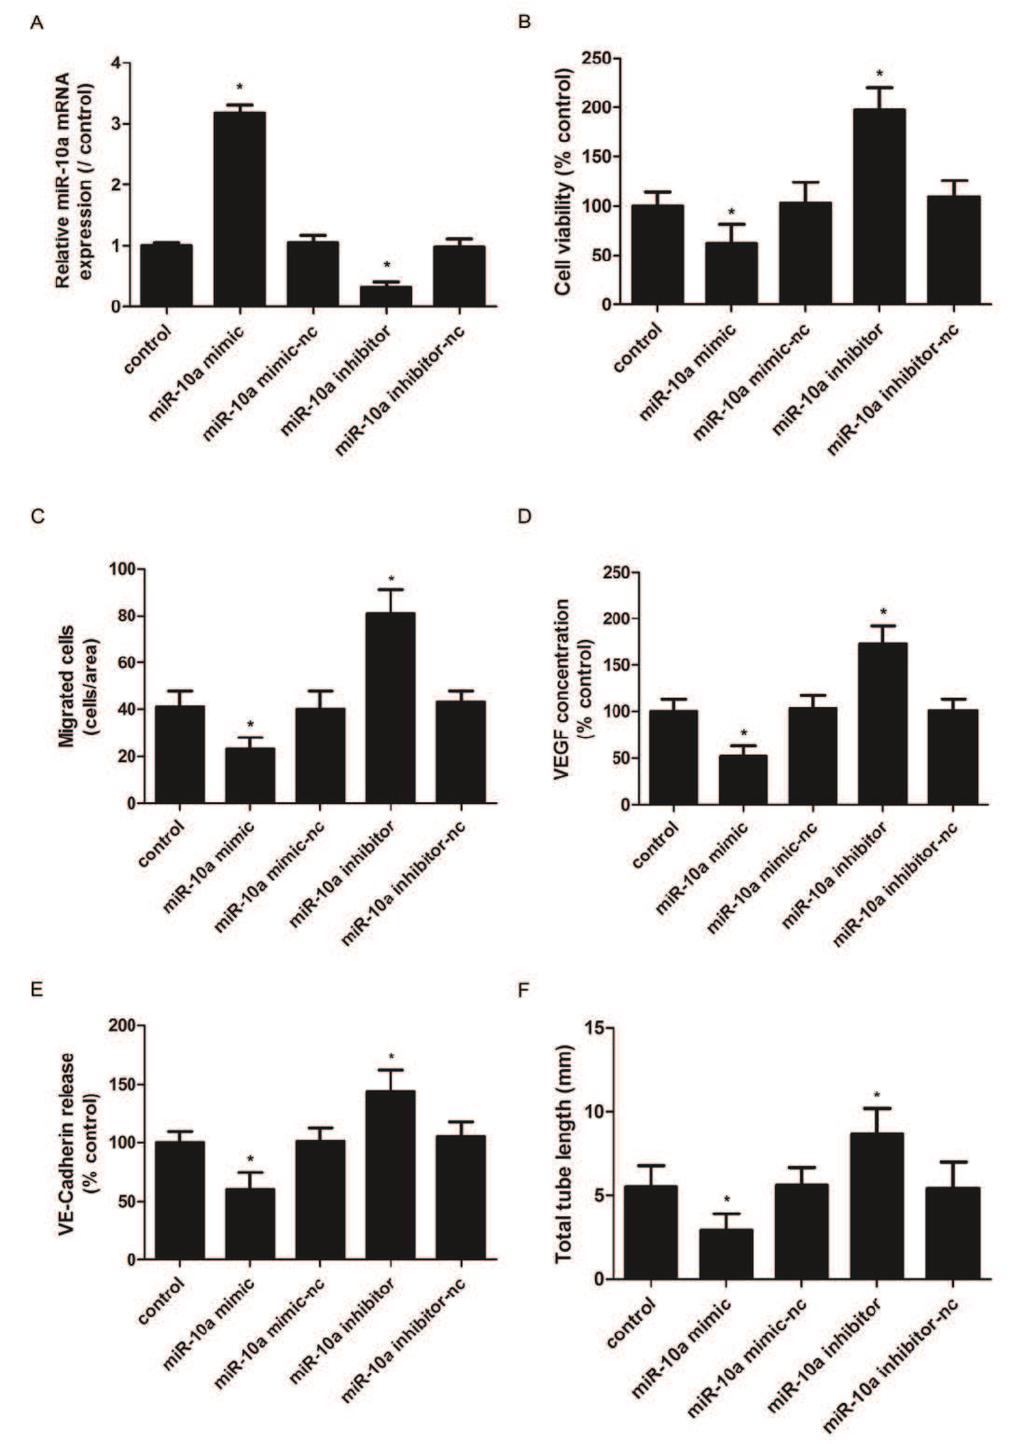 2200 MiR-10a suppresses MUVECs viability, migration and tube formation MiR-10a levels in MU- - and VE-cadherin (E) concentrations in the culture medium.